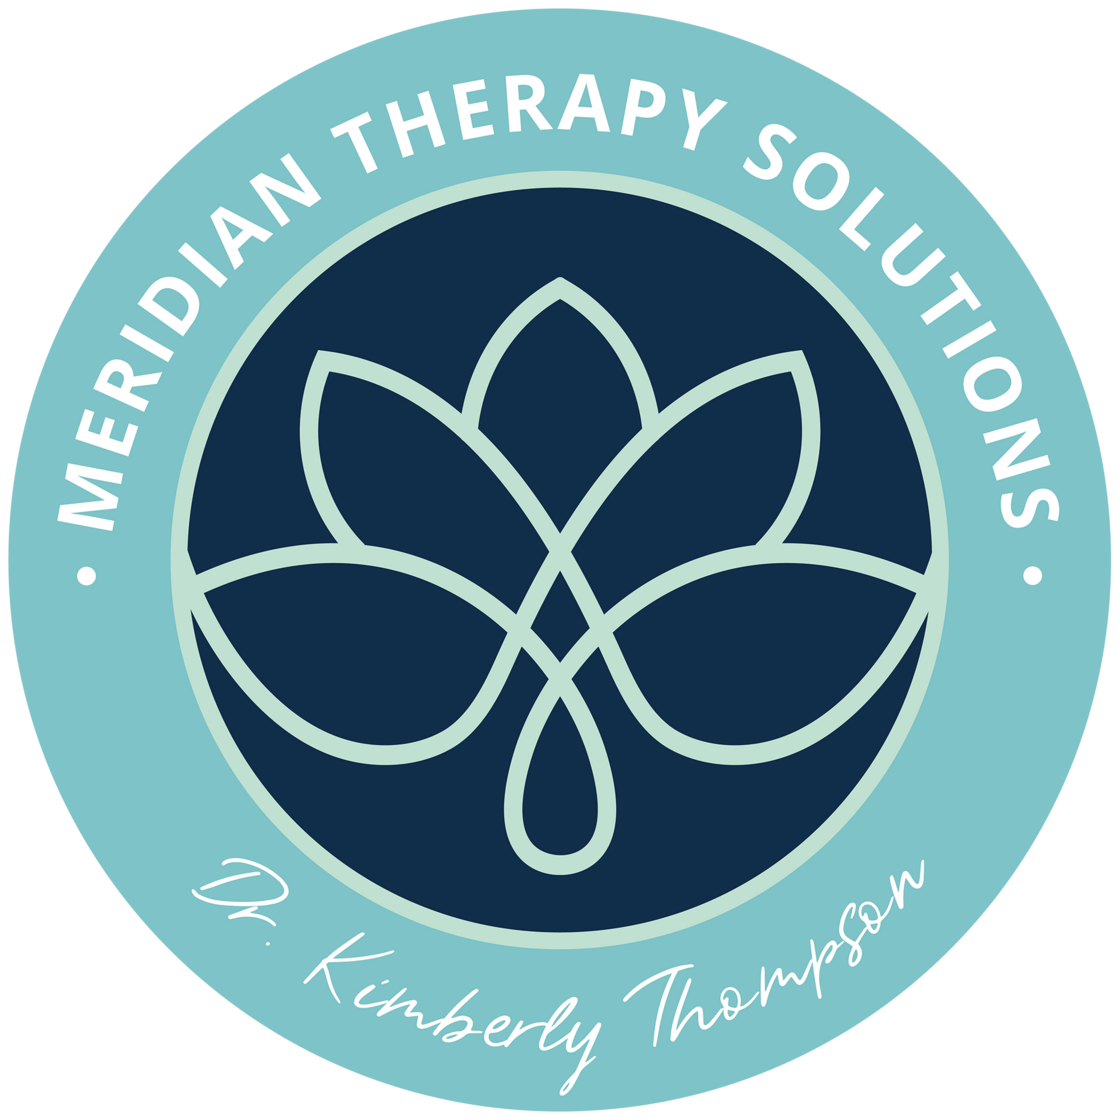 Meridian Therapy Solutions Logo Medium copy.png